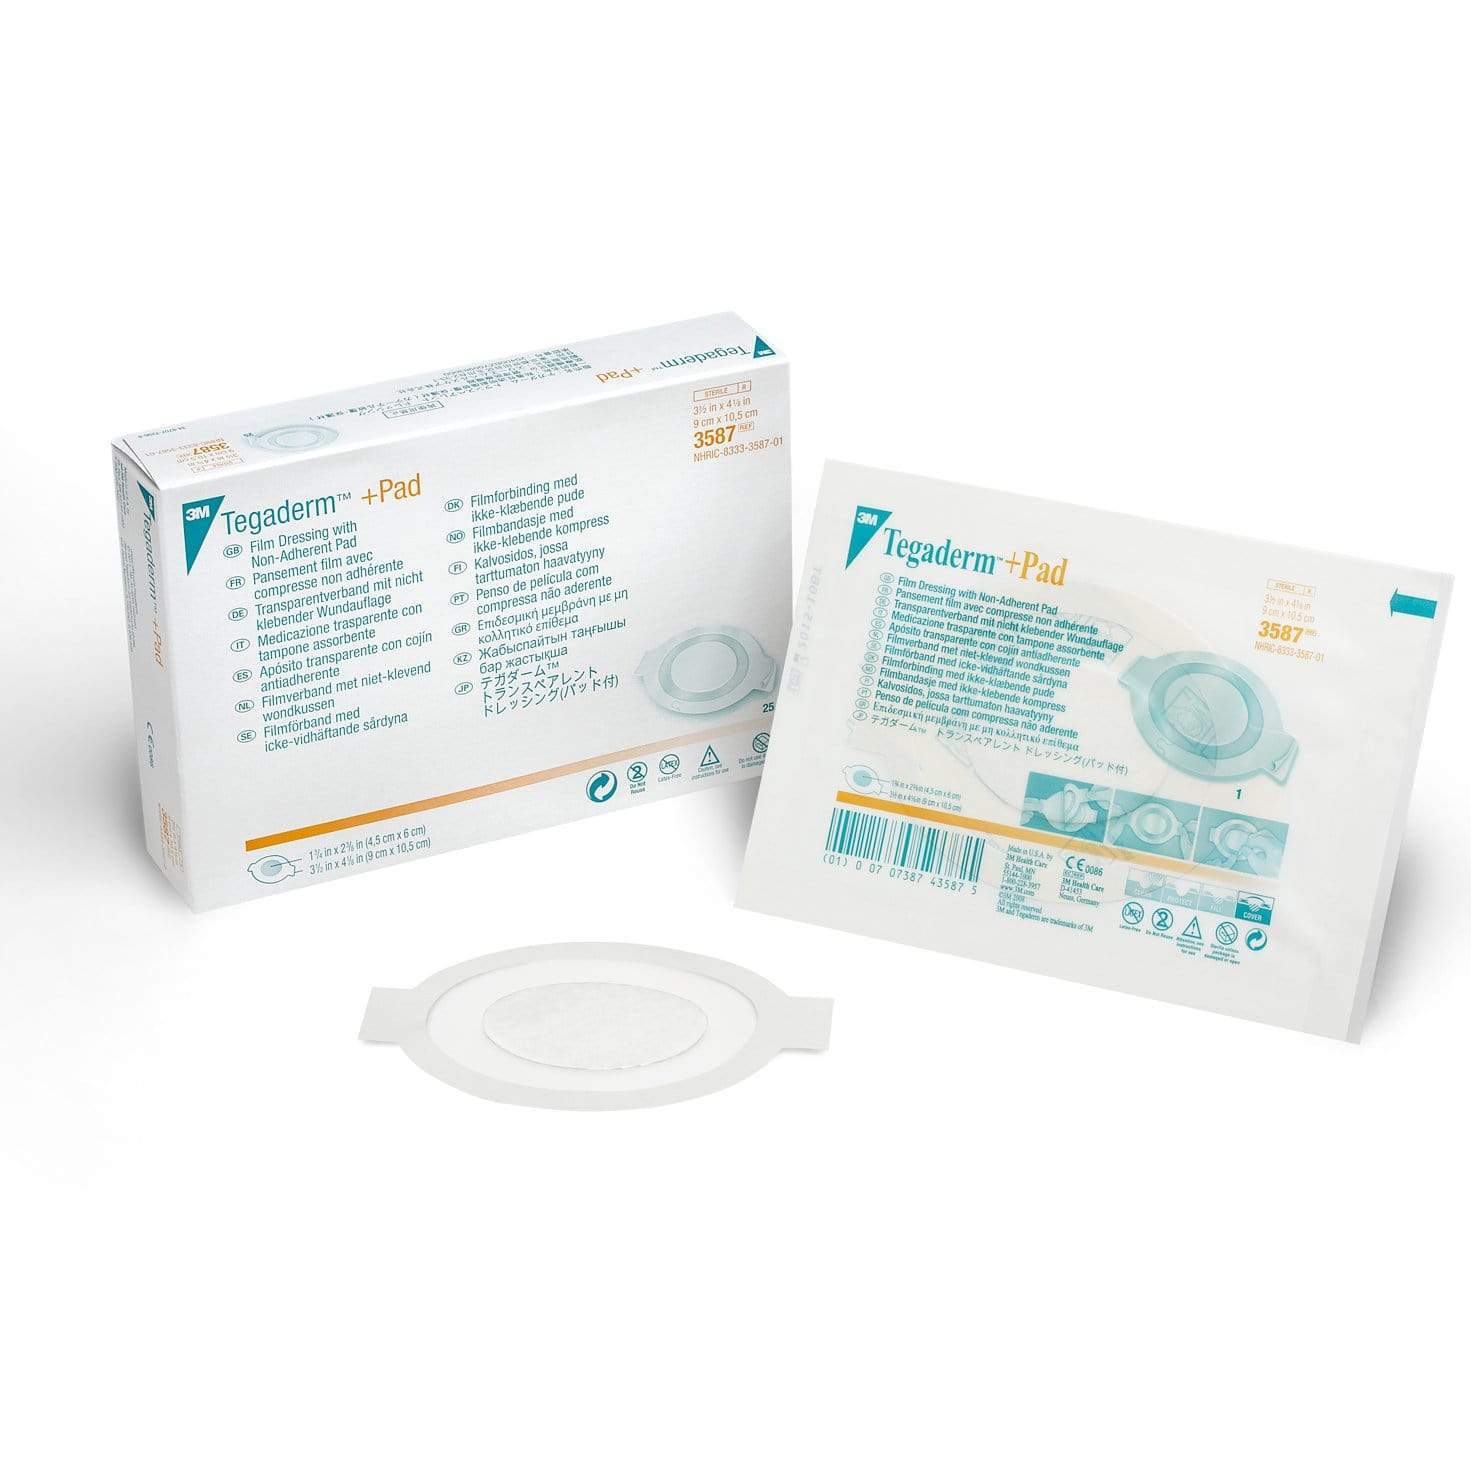 3M Tegaderm +Pad Transparent Dressing with Absorbent Pad